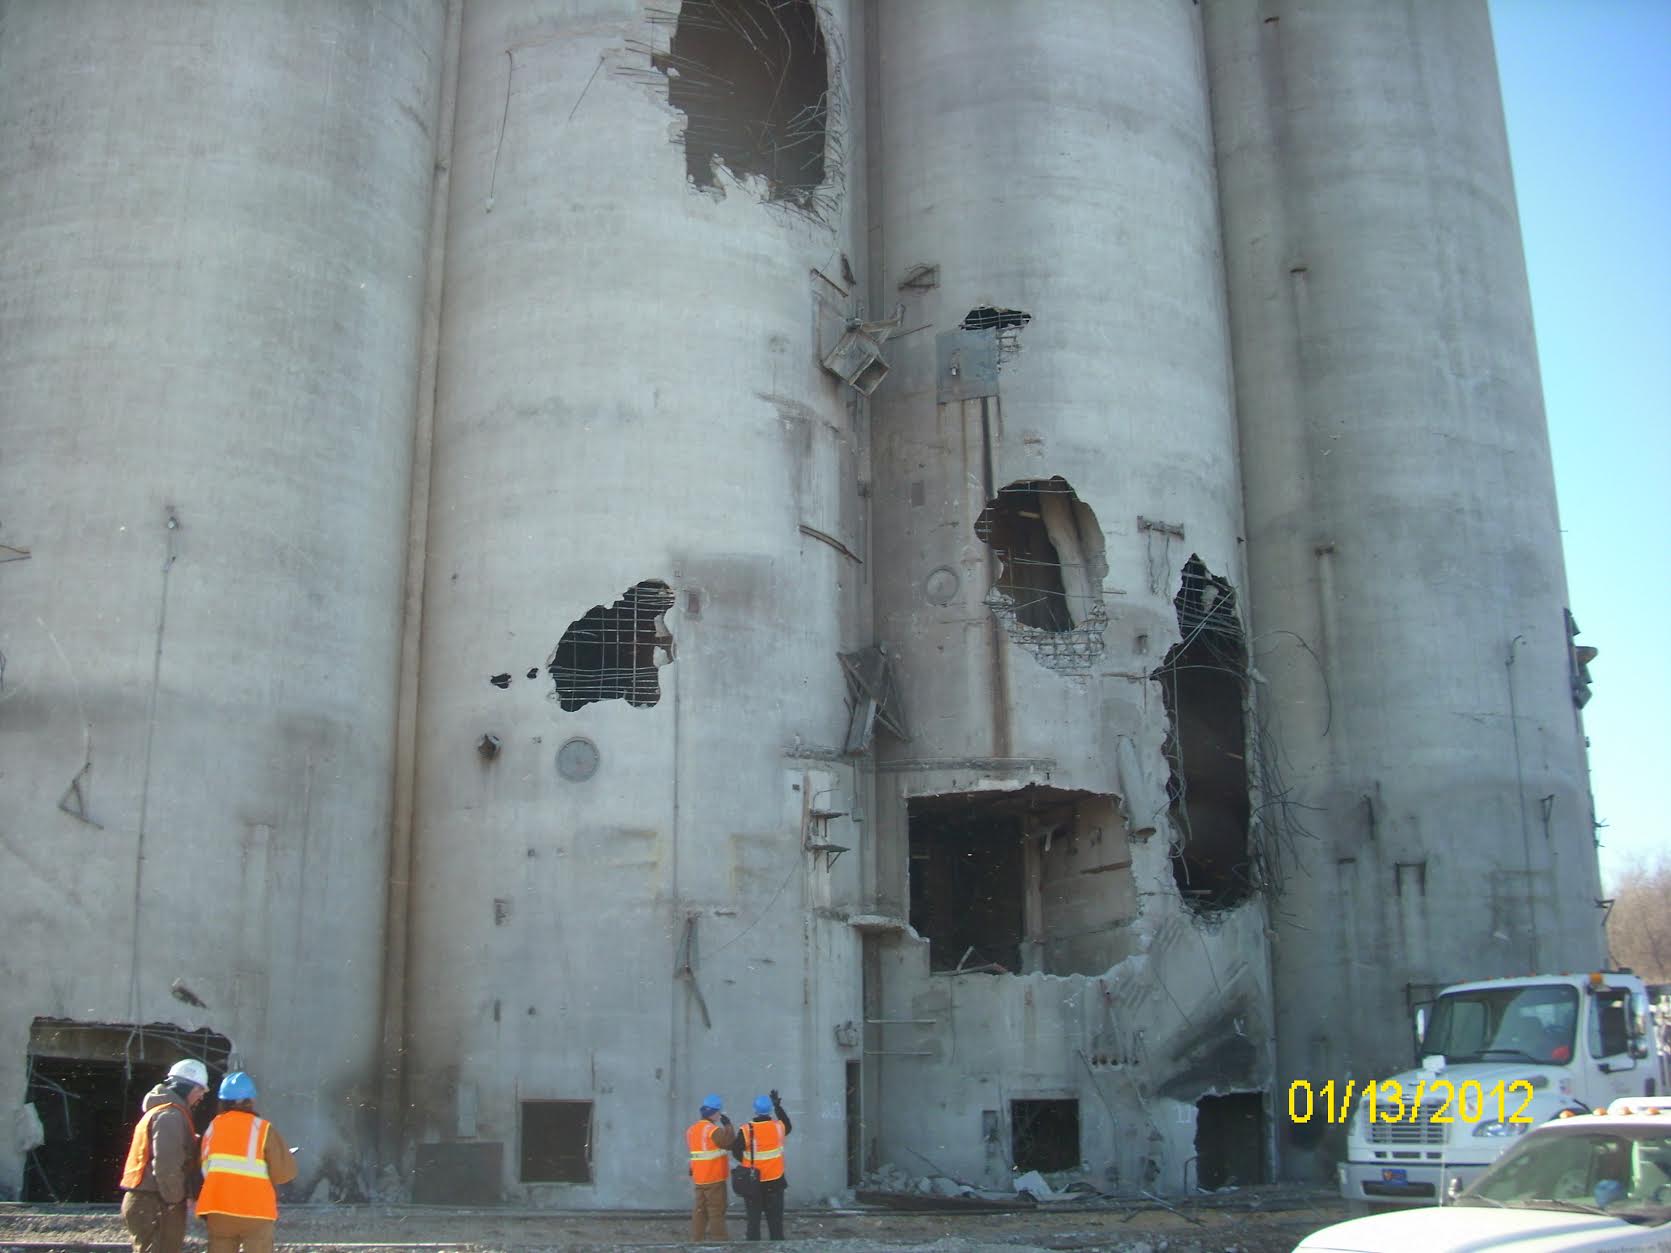 A corn elevator showing explosion holes